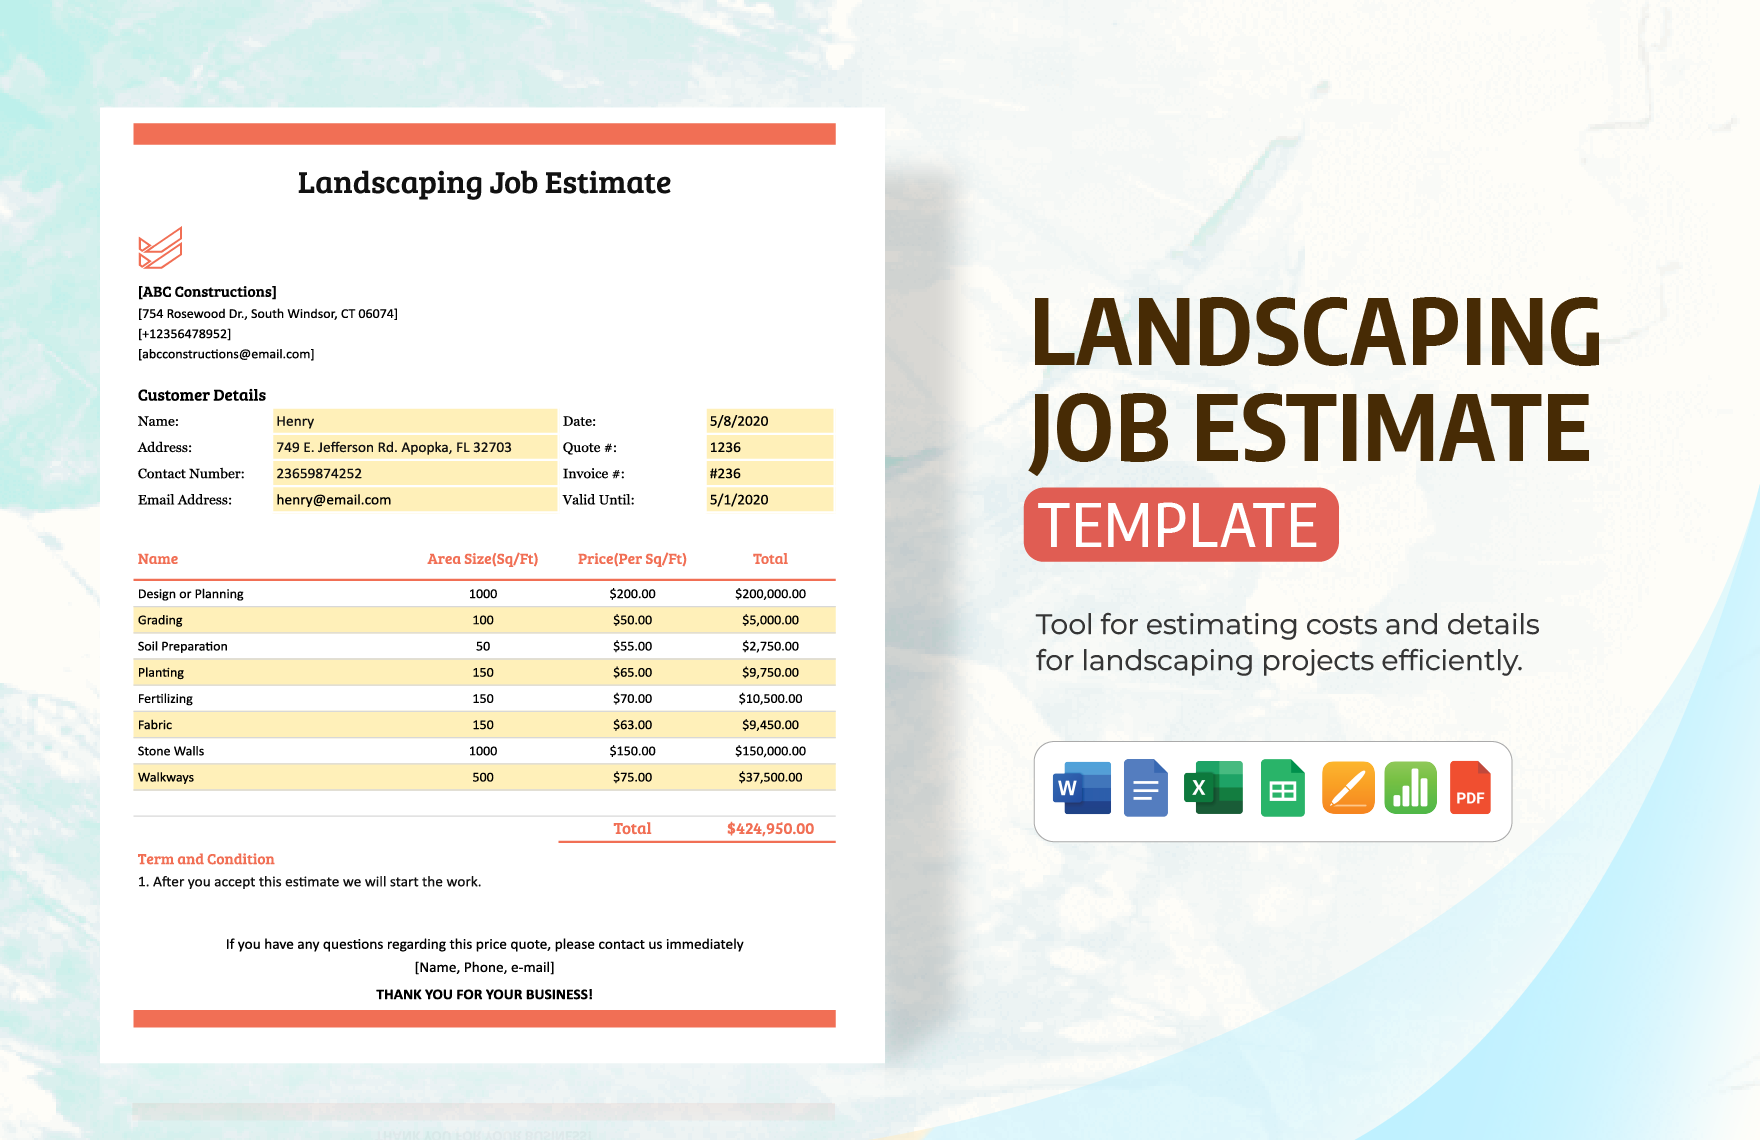 Landscaping Job Estimate Template in Word, Google Docs, Excel, PDF, Google Sheets, Apple Pages, Apple Numbers